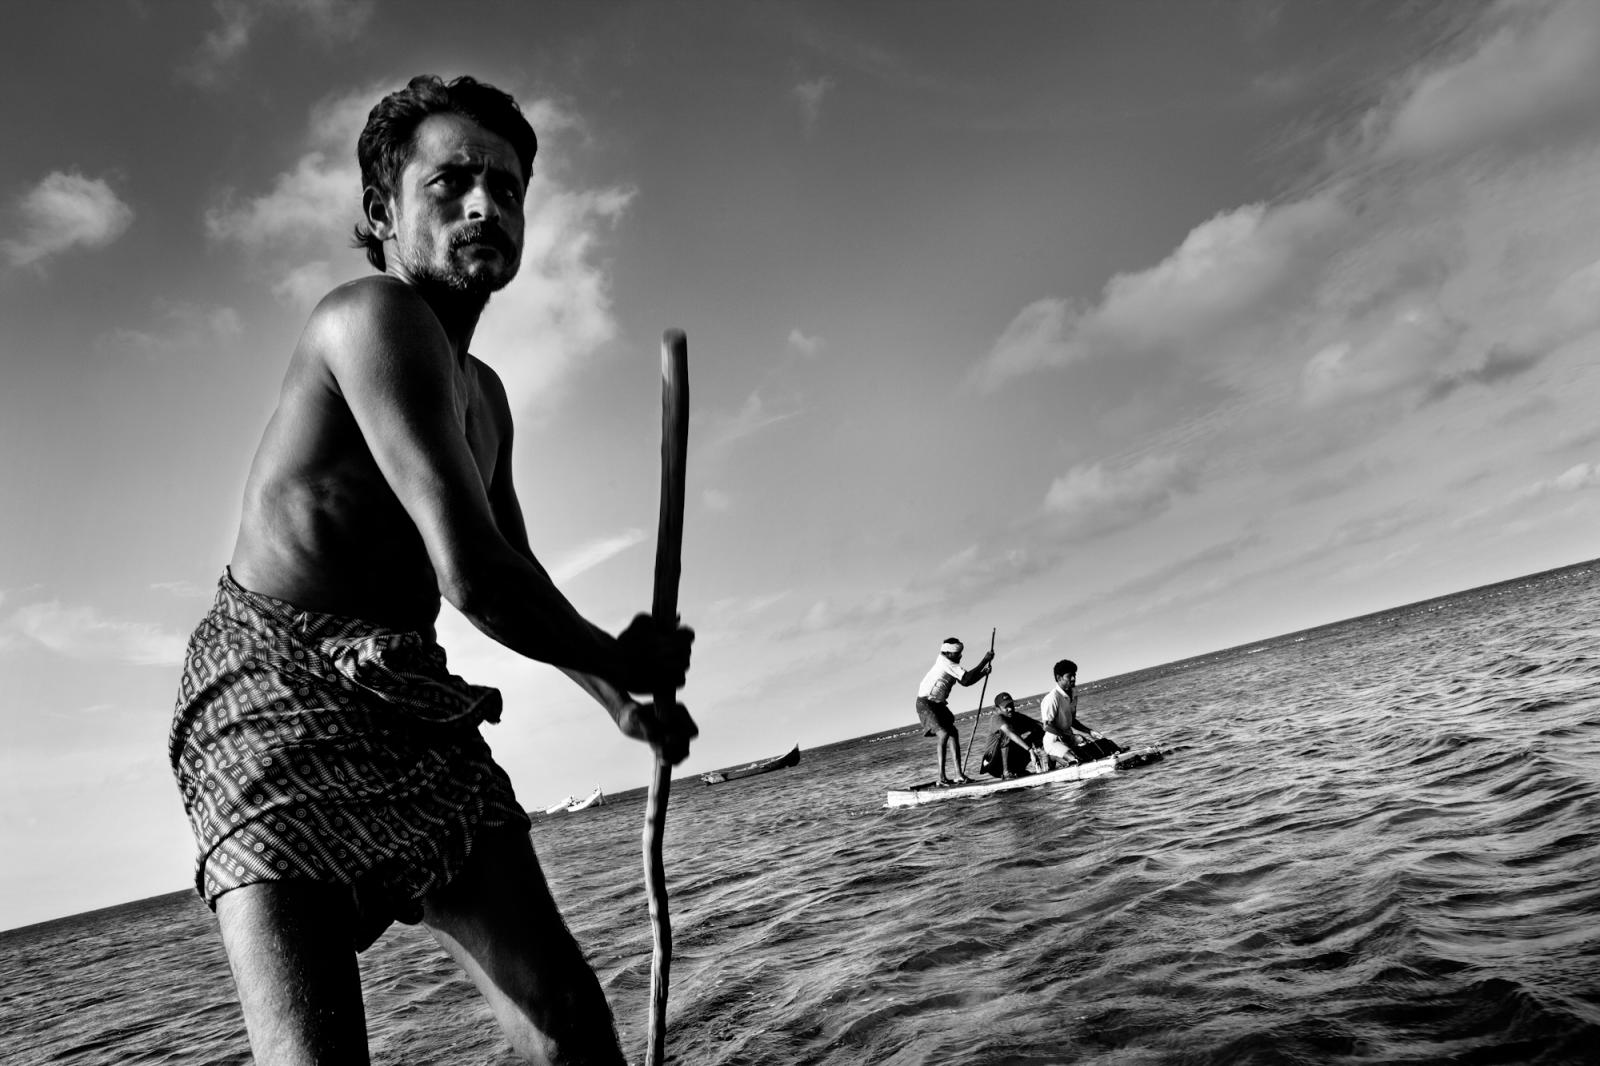 Image from Life in Troubled Waters-NYT